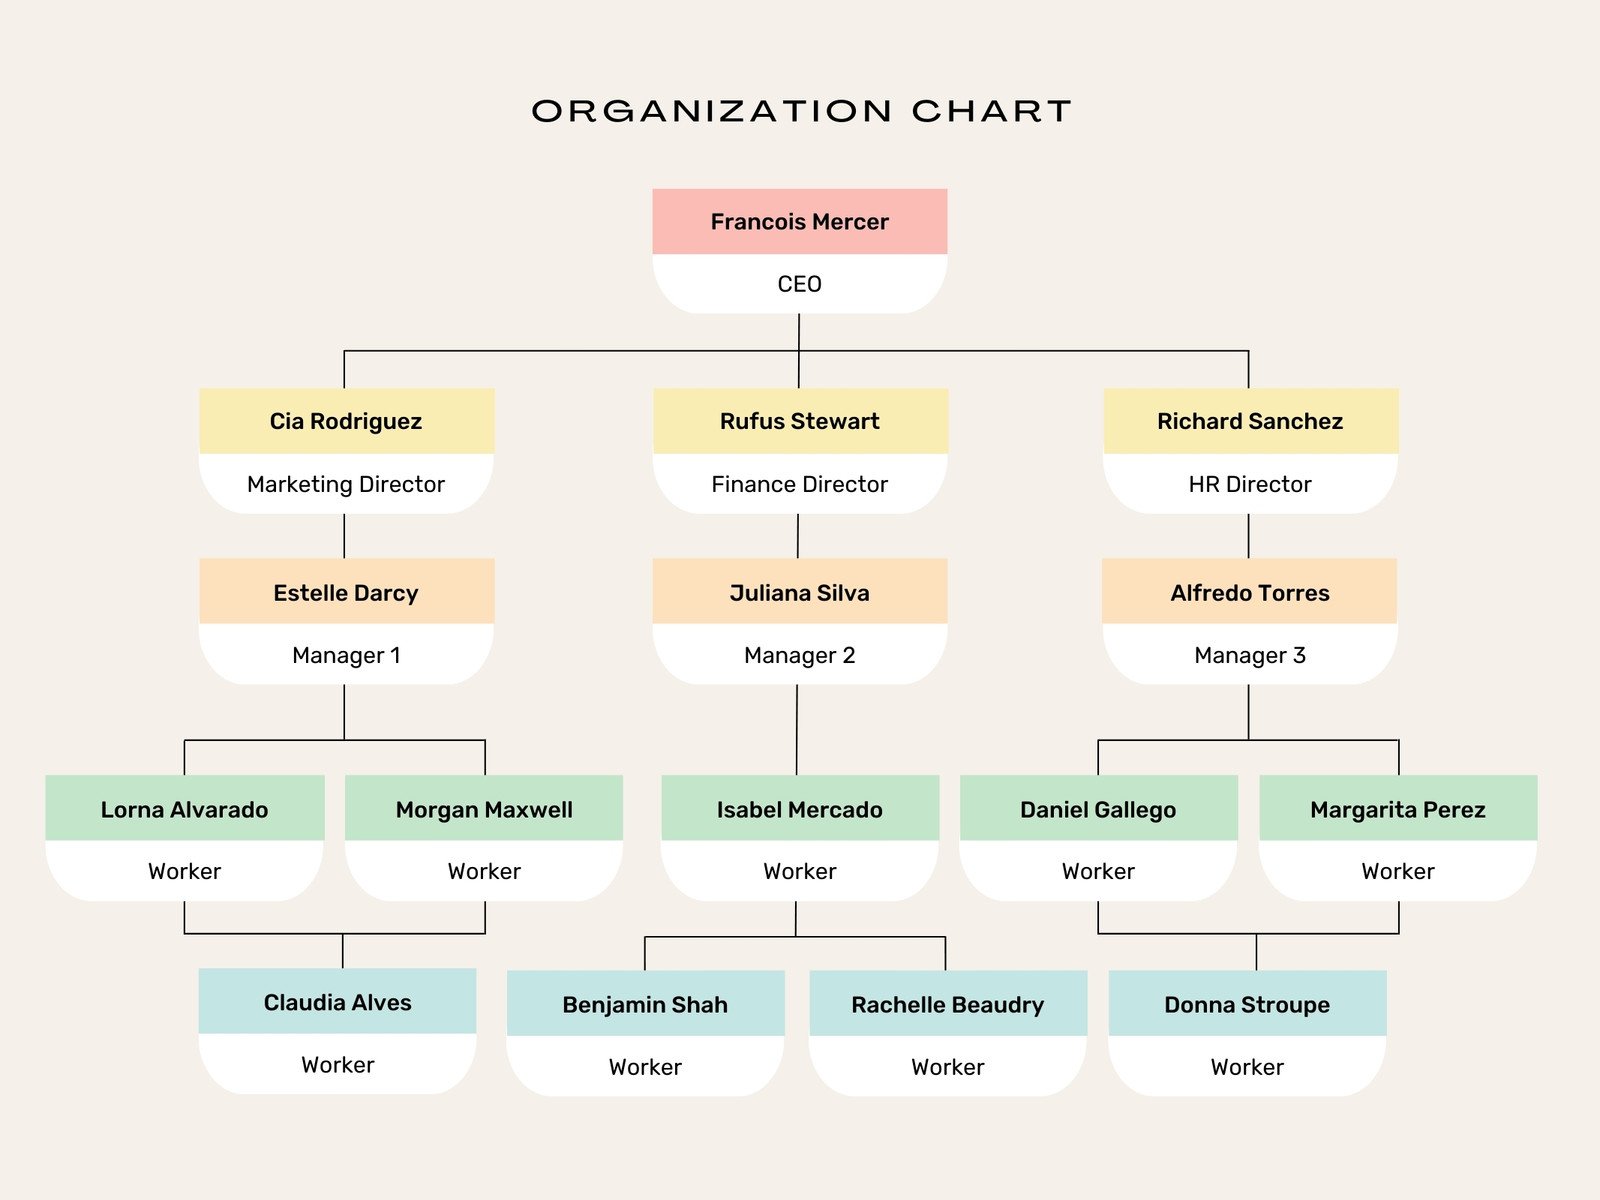 Templates For Organizational Charts